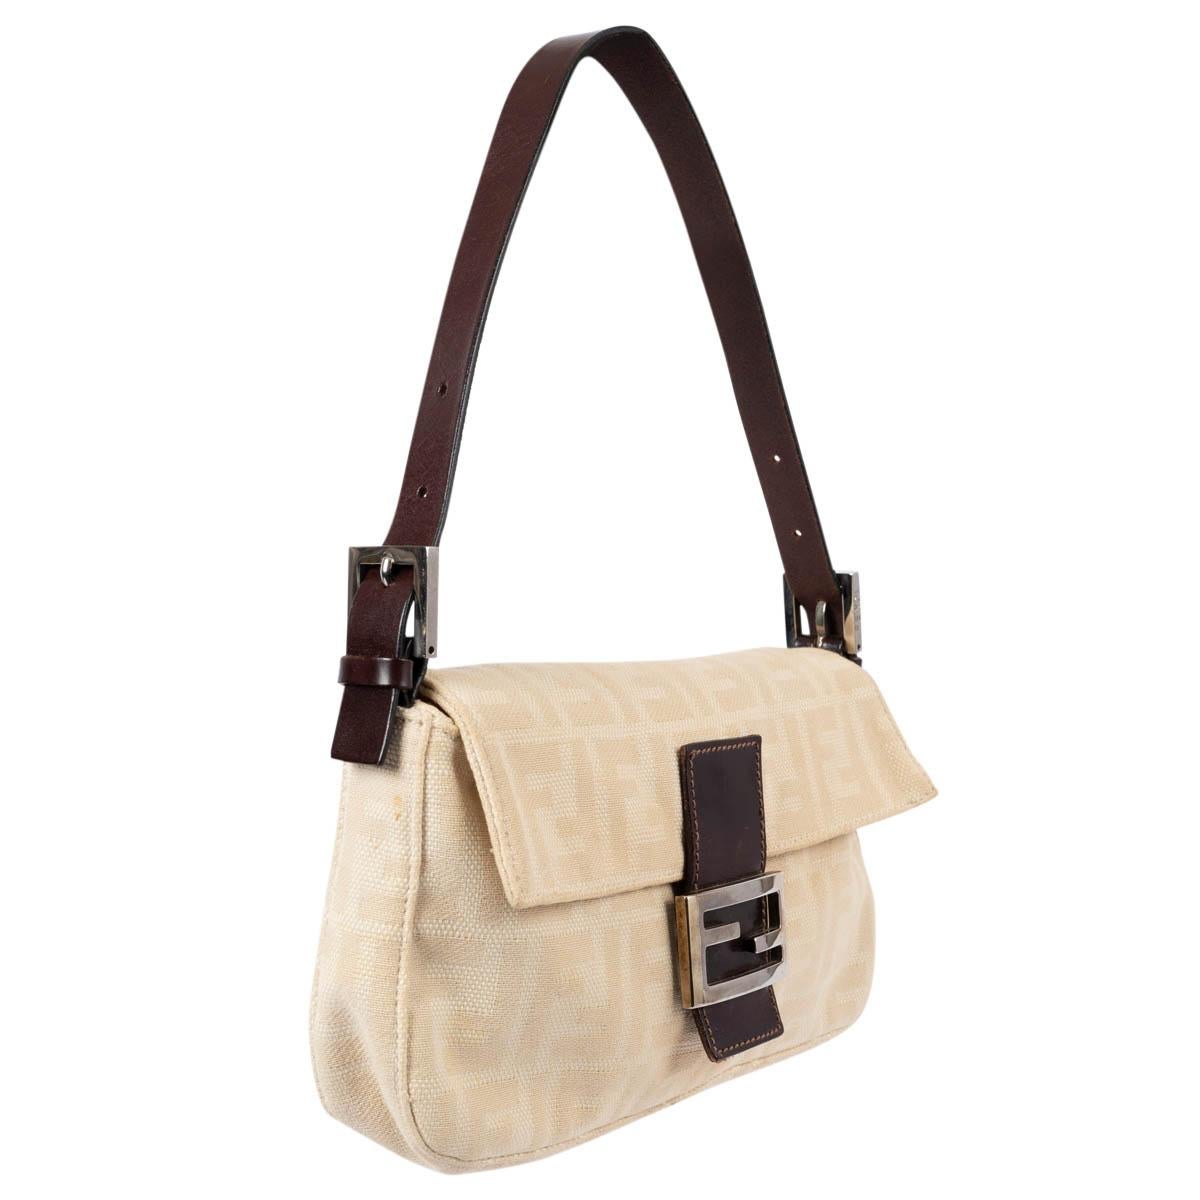 100% authentic Fendi baguette bag in beige Zucca canvas with dark brown leather trim and silver-tone metal buckle. Lined in dark brown nylon with one zipper pocket against the back. Has been carried and shows some darkening to the canvas, scratches